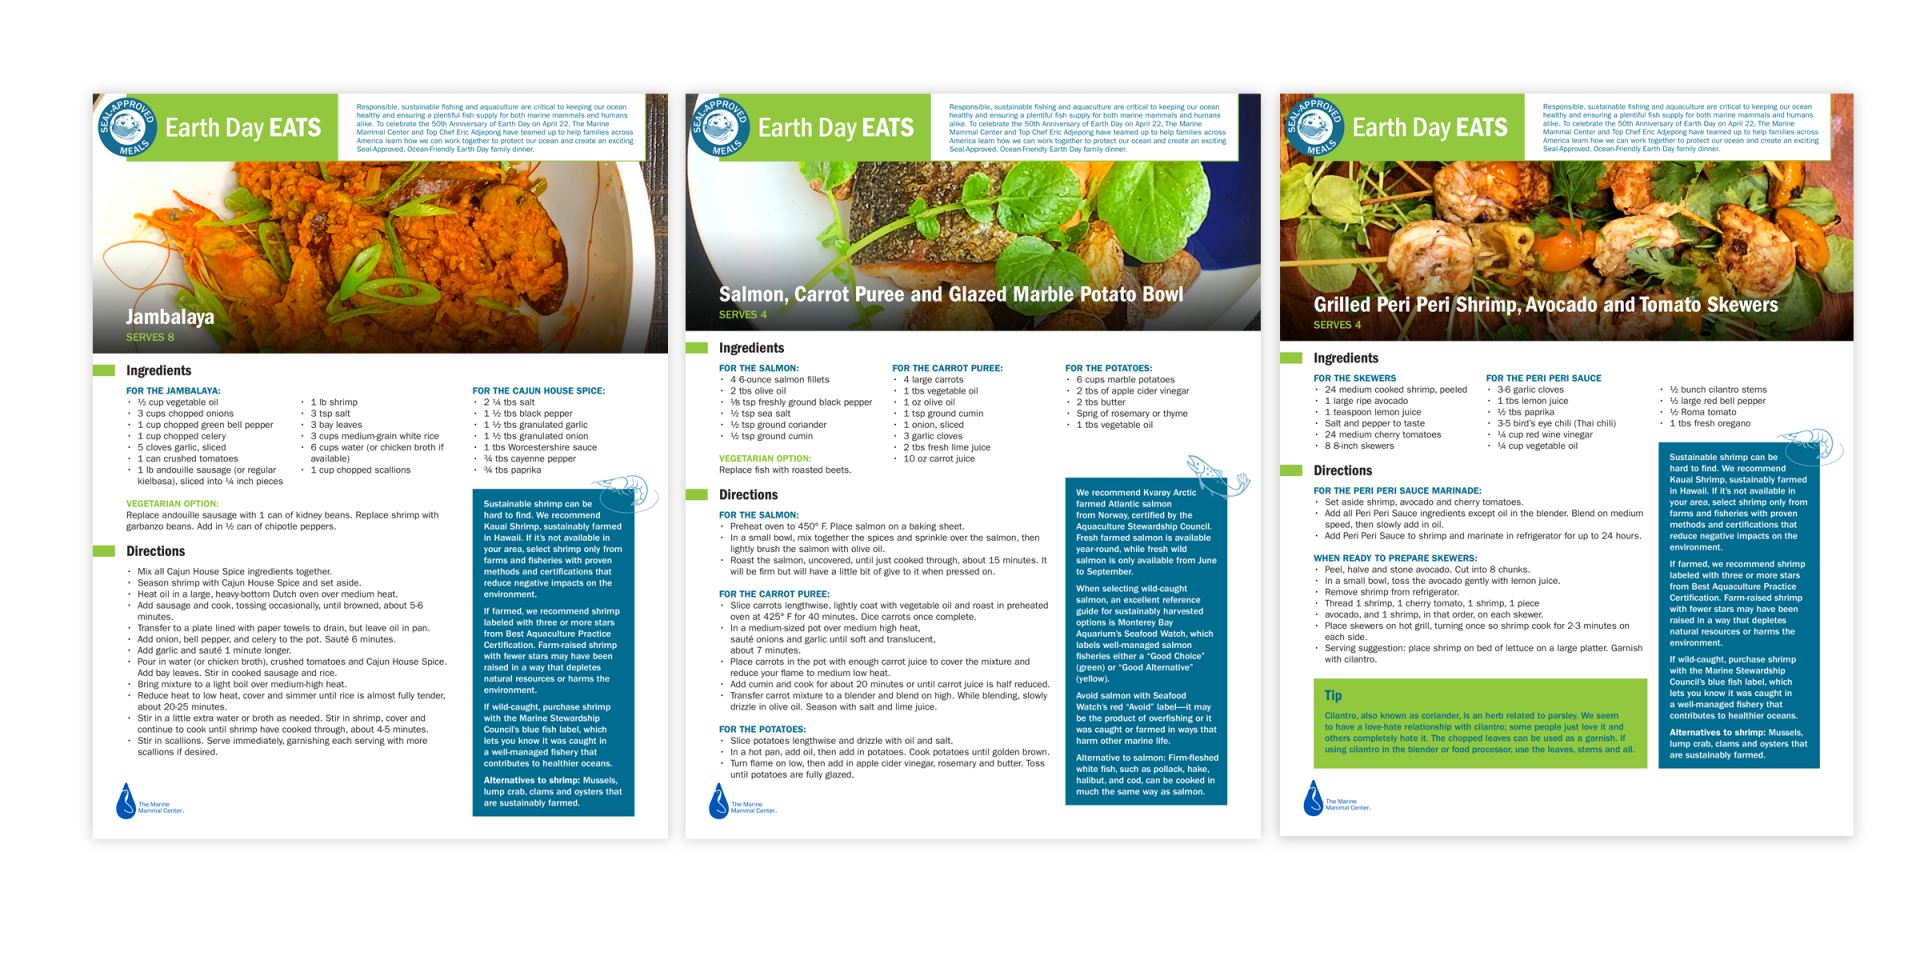 Seal Approved Meals Campaign Earth Day Eats Recipe Cards